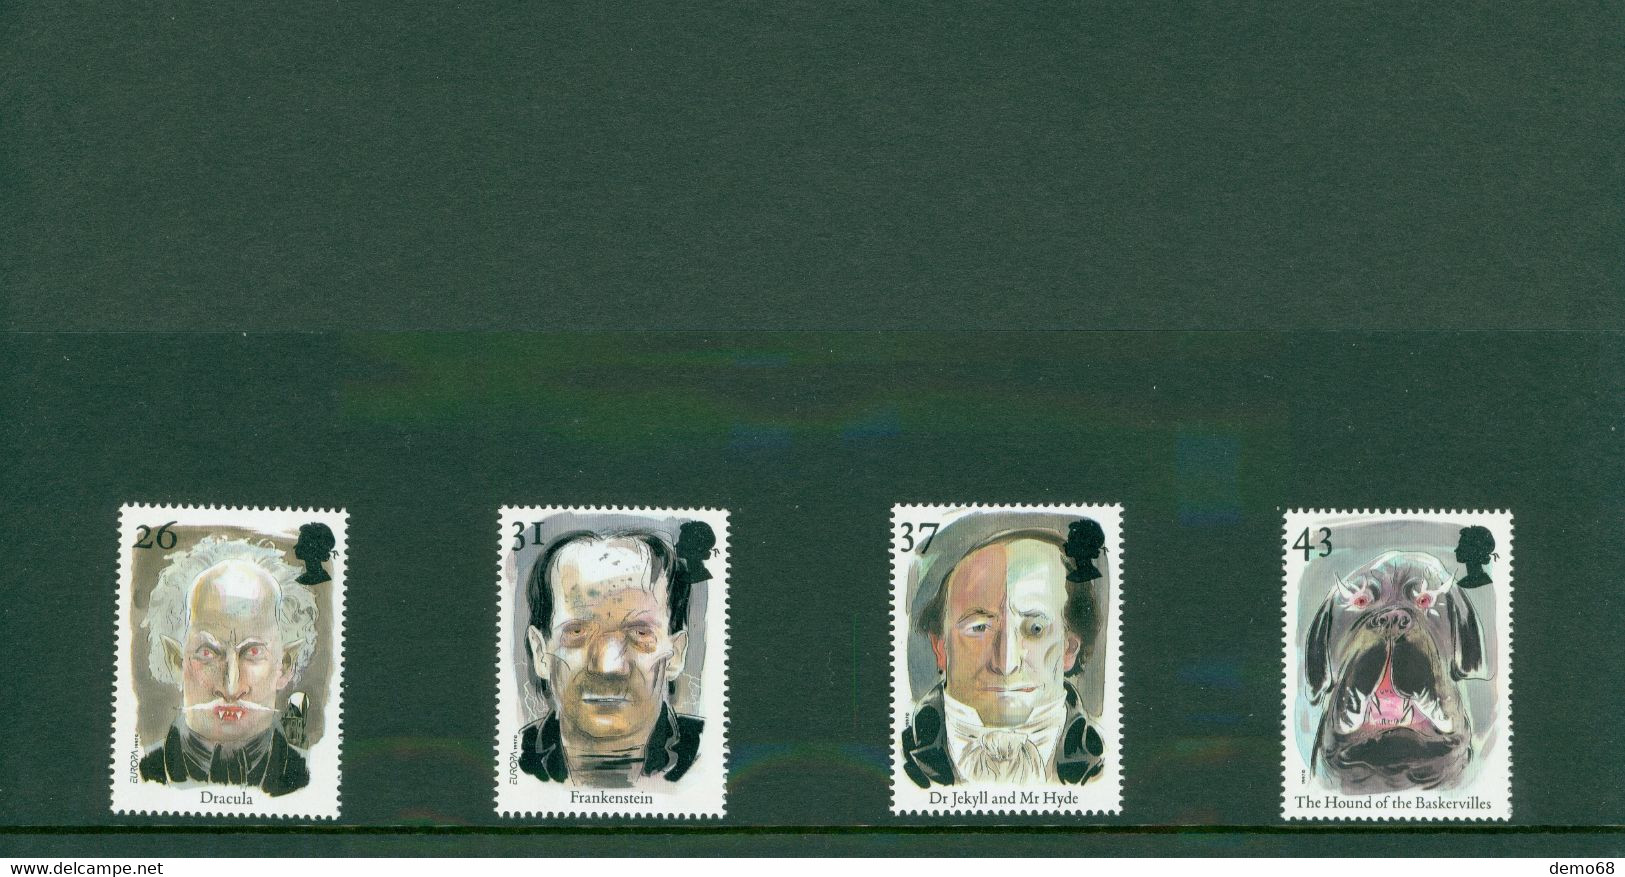 Stamp Timbre England Great Britain British Tales Of Terror Dracula Dr Jeckyll Frankenst. GB New 4 Royal Mail Mint Stamps - Verzamelingen